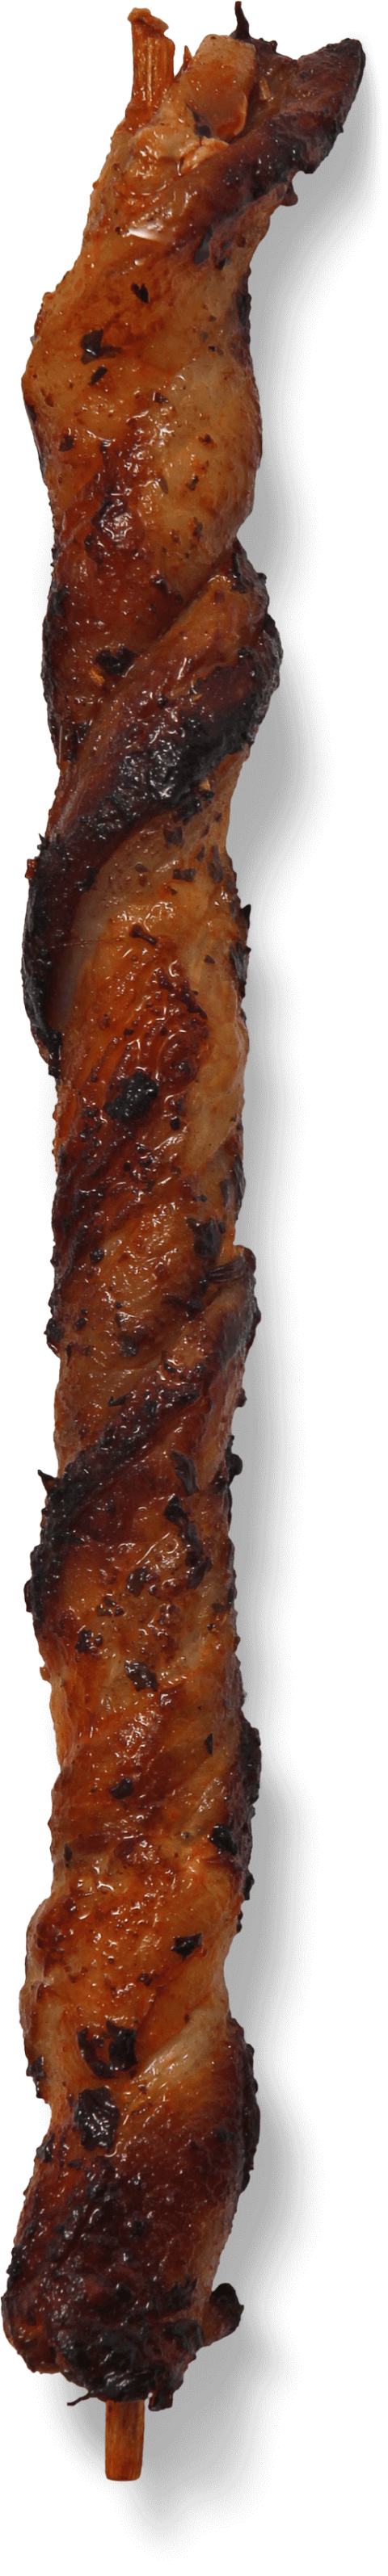 Bacon Grill Stick Grilled,Easy Bacon Grill Stick,Delicious Bacon Grill Stick,HD Bacon Stick Photo Free Download PNG Image,Transparent Background